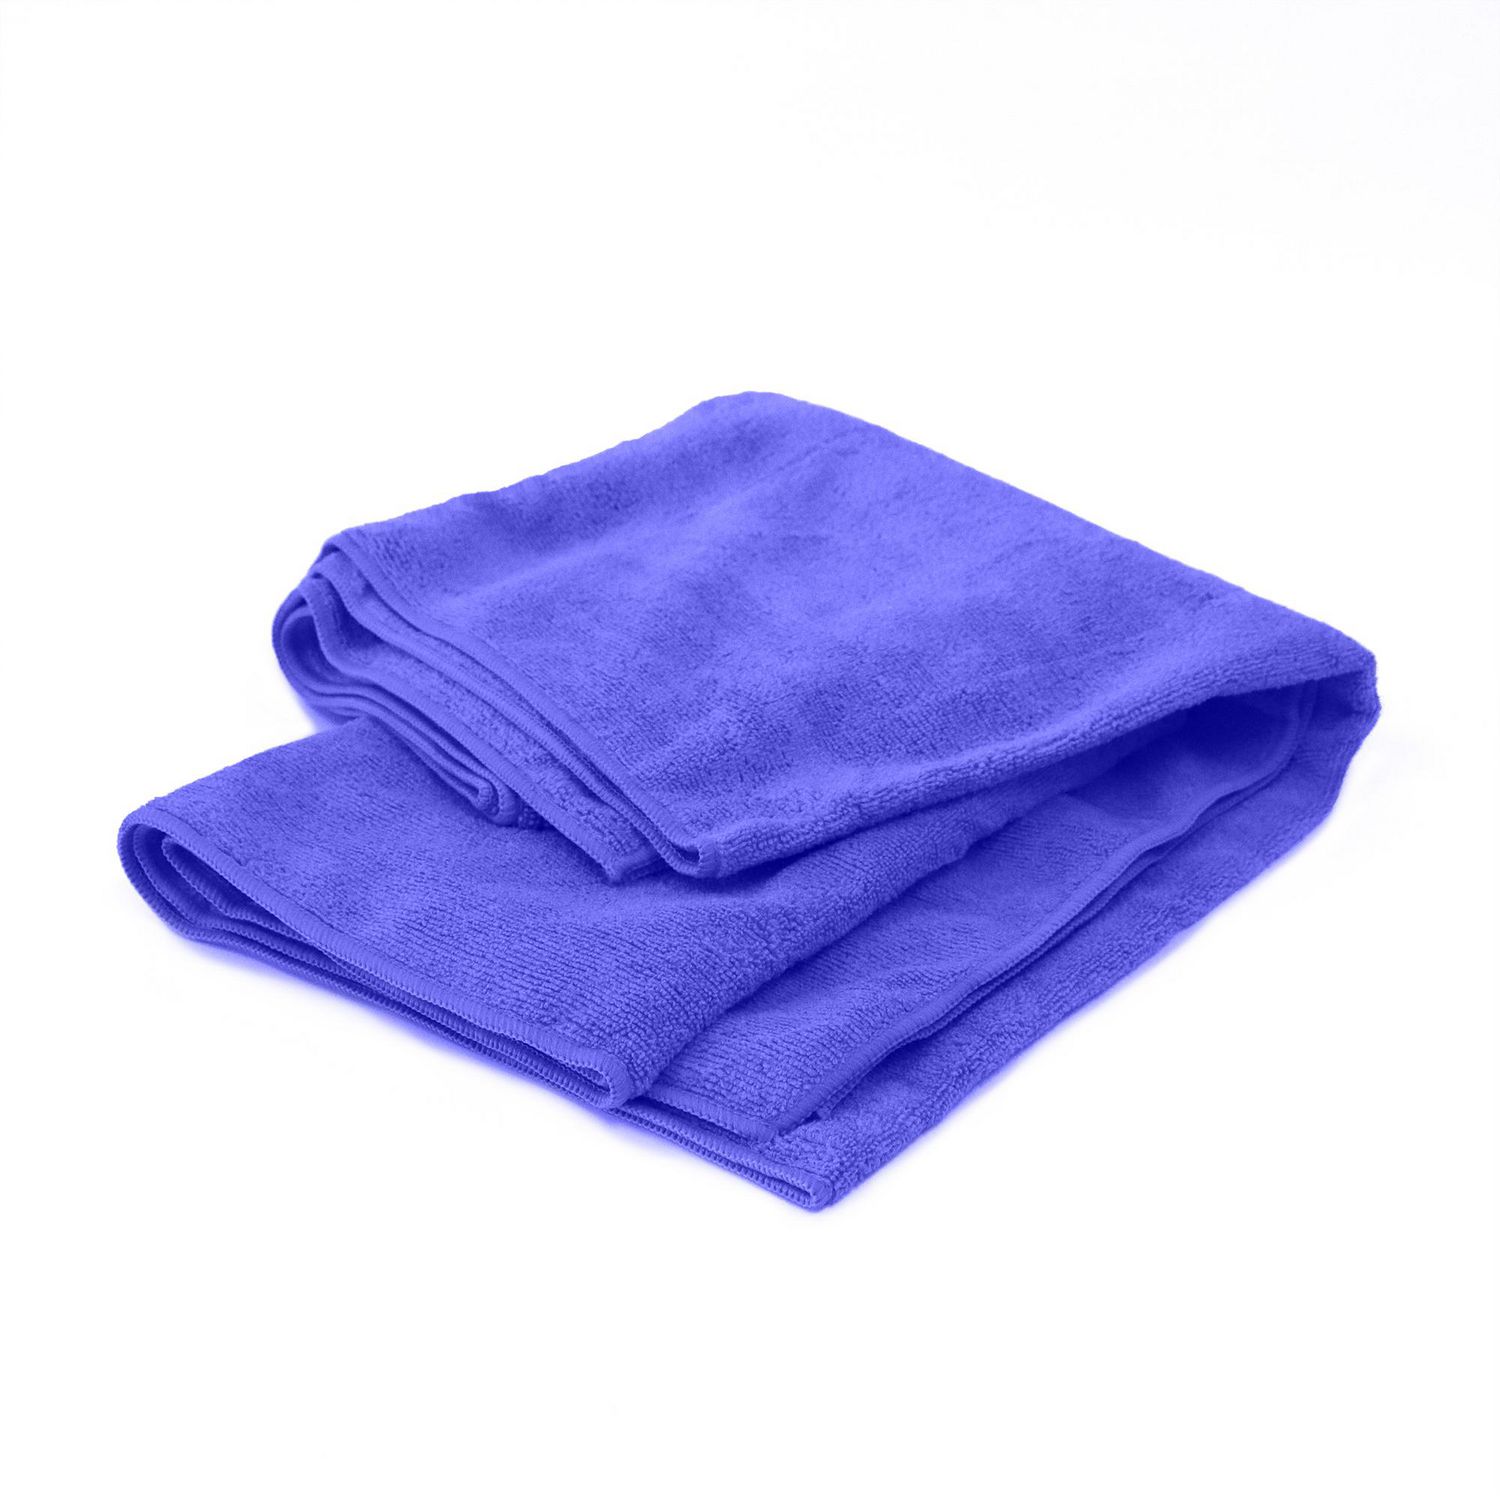 NEW Inhale Confidence Sweat Towel, Gym Towel, Sports Towel, Yoga Gifts, Sports  Towel, Fitness Gifts, Exercise Towels 